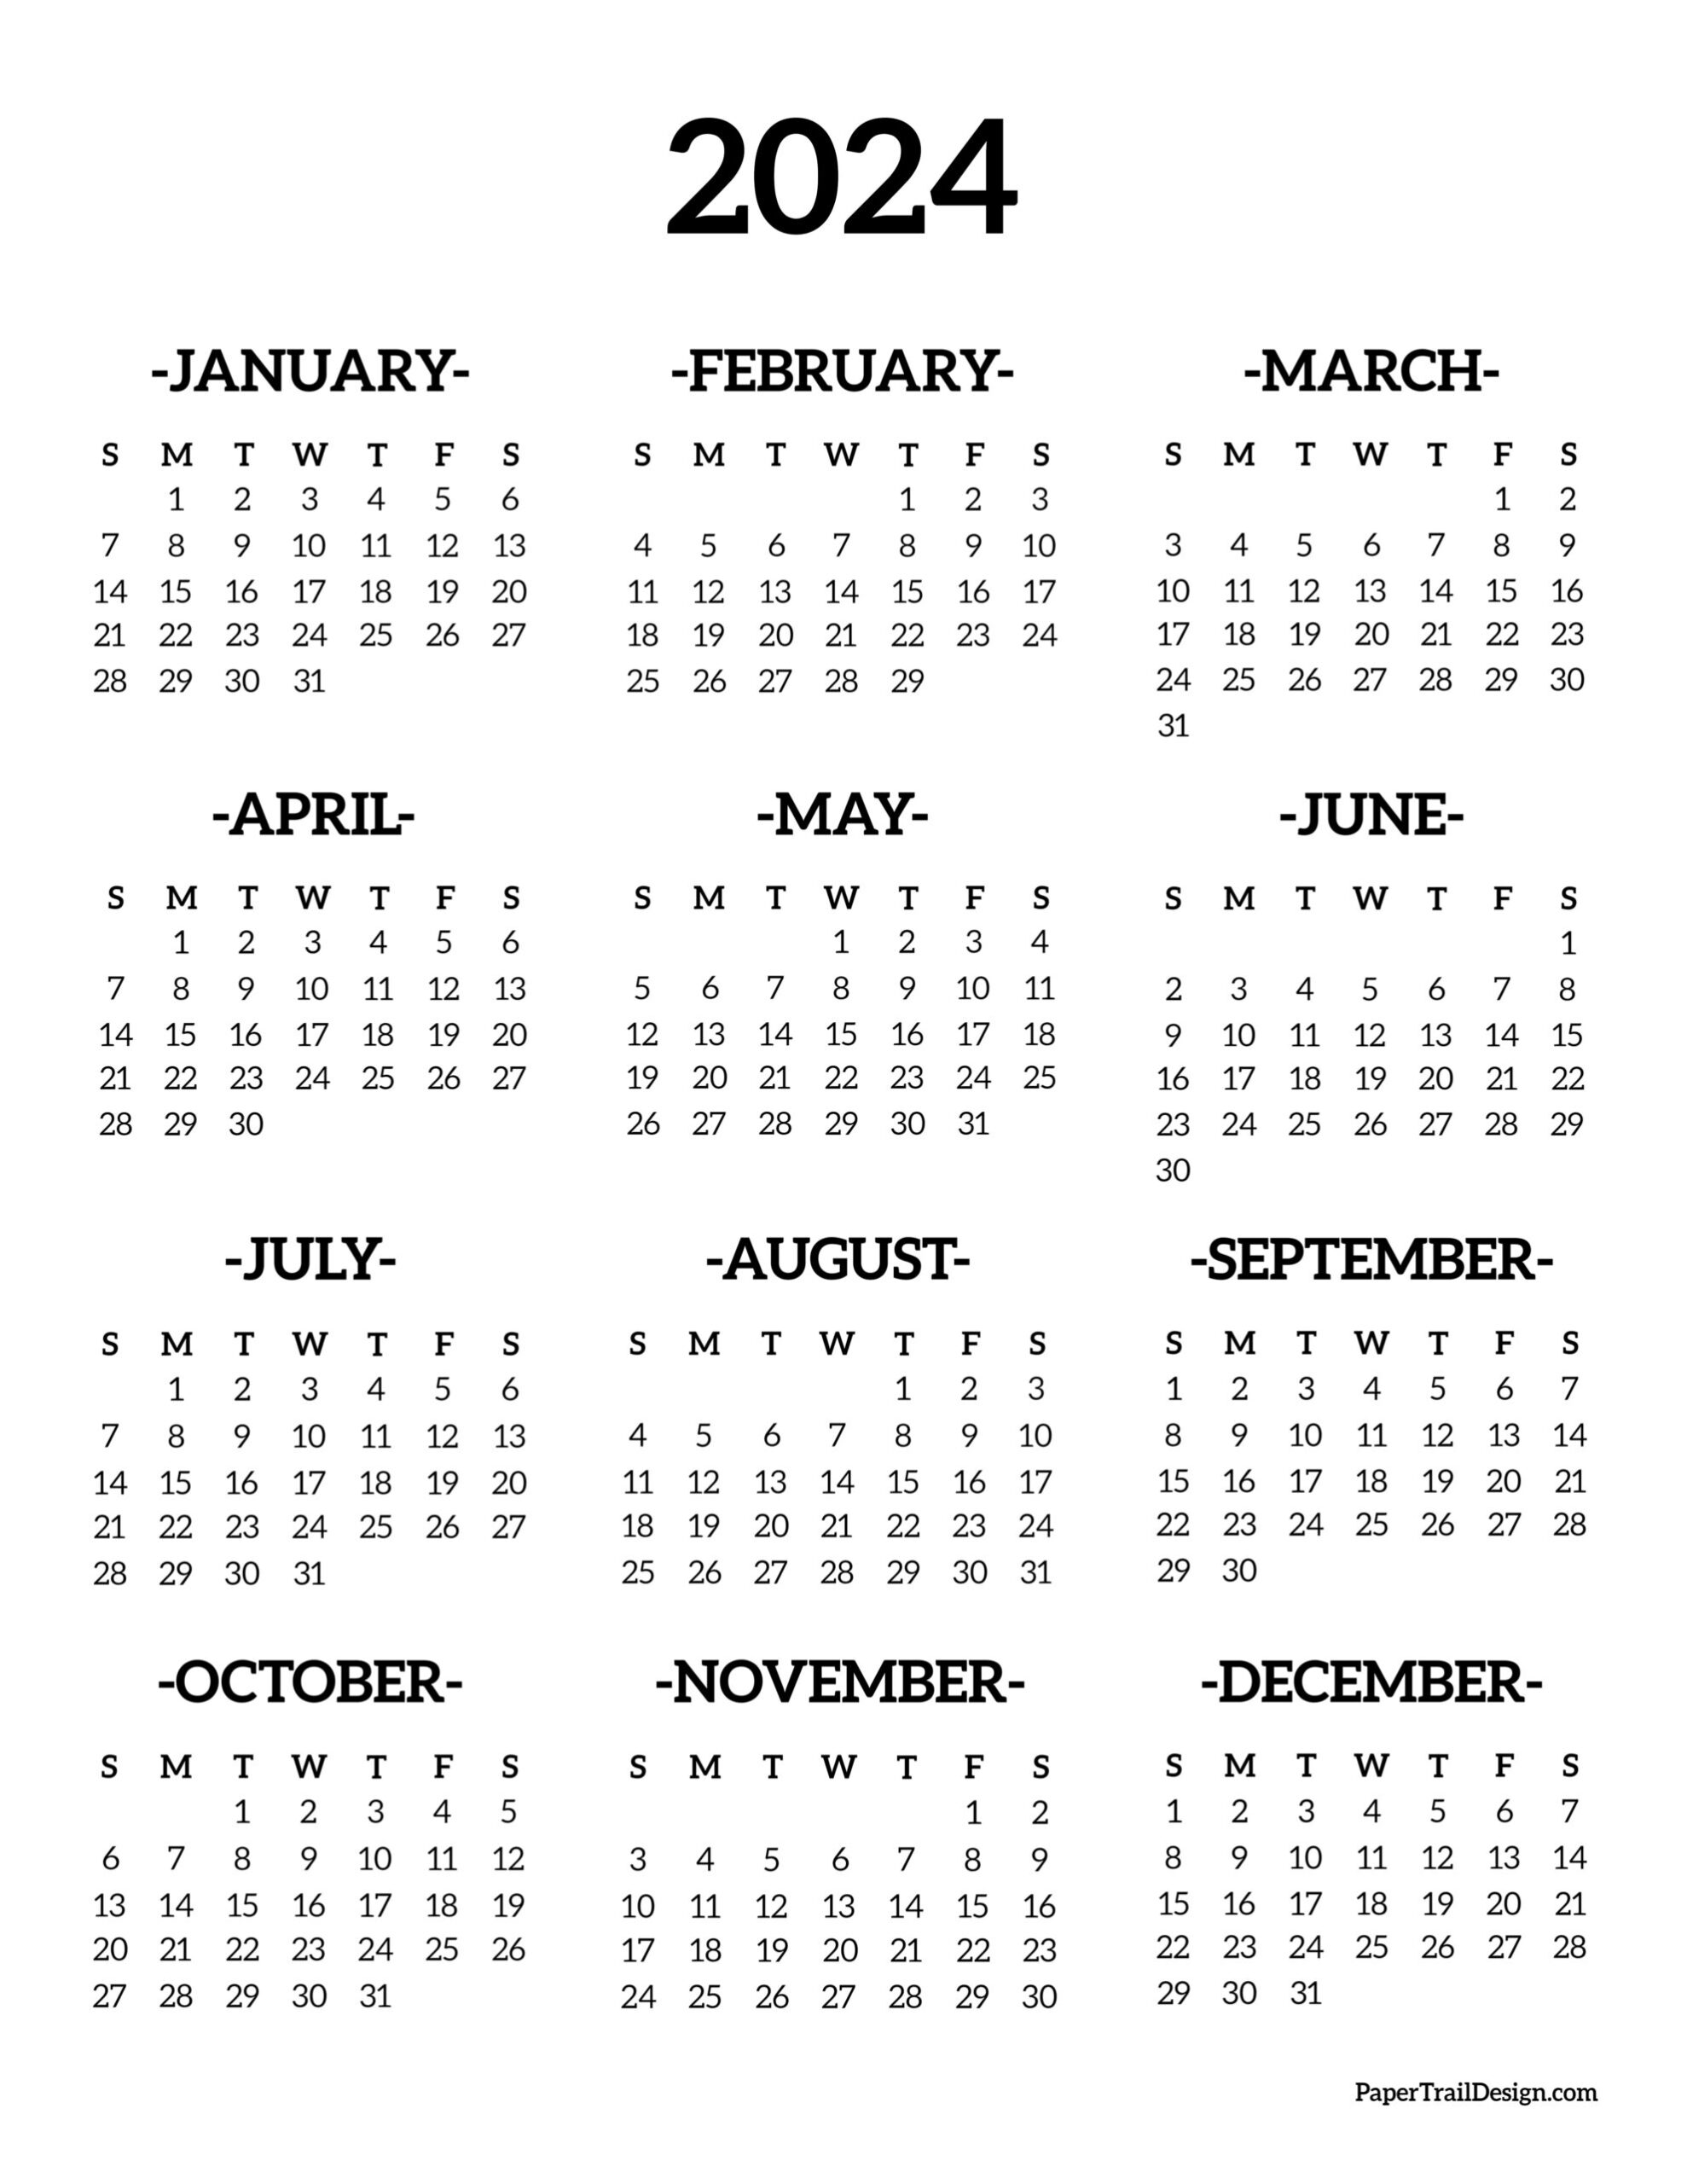 Calendar 2024 Printable One Page - Paper Trail Design for Yearly Calendar 2024 Printable Free